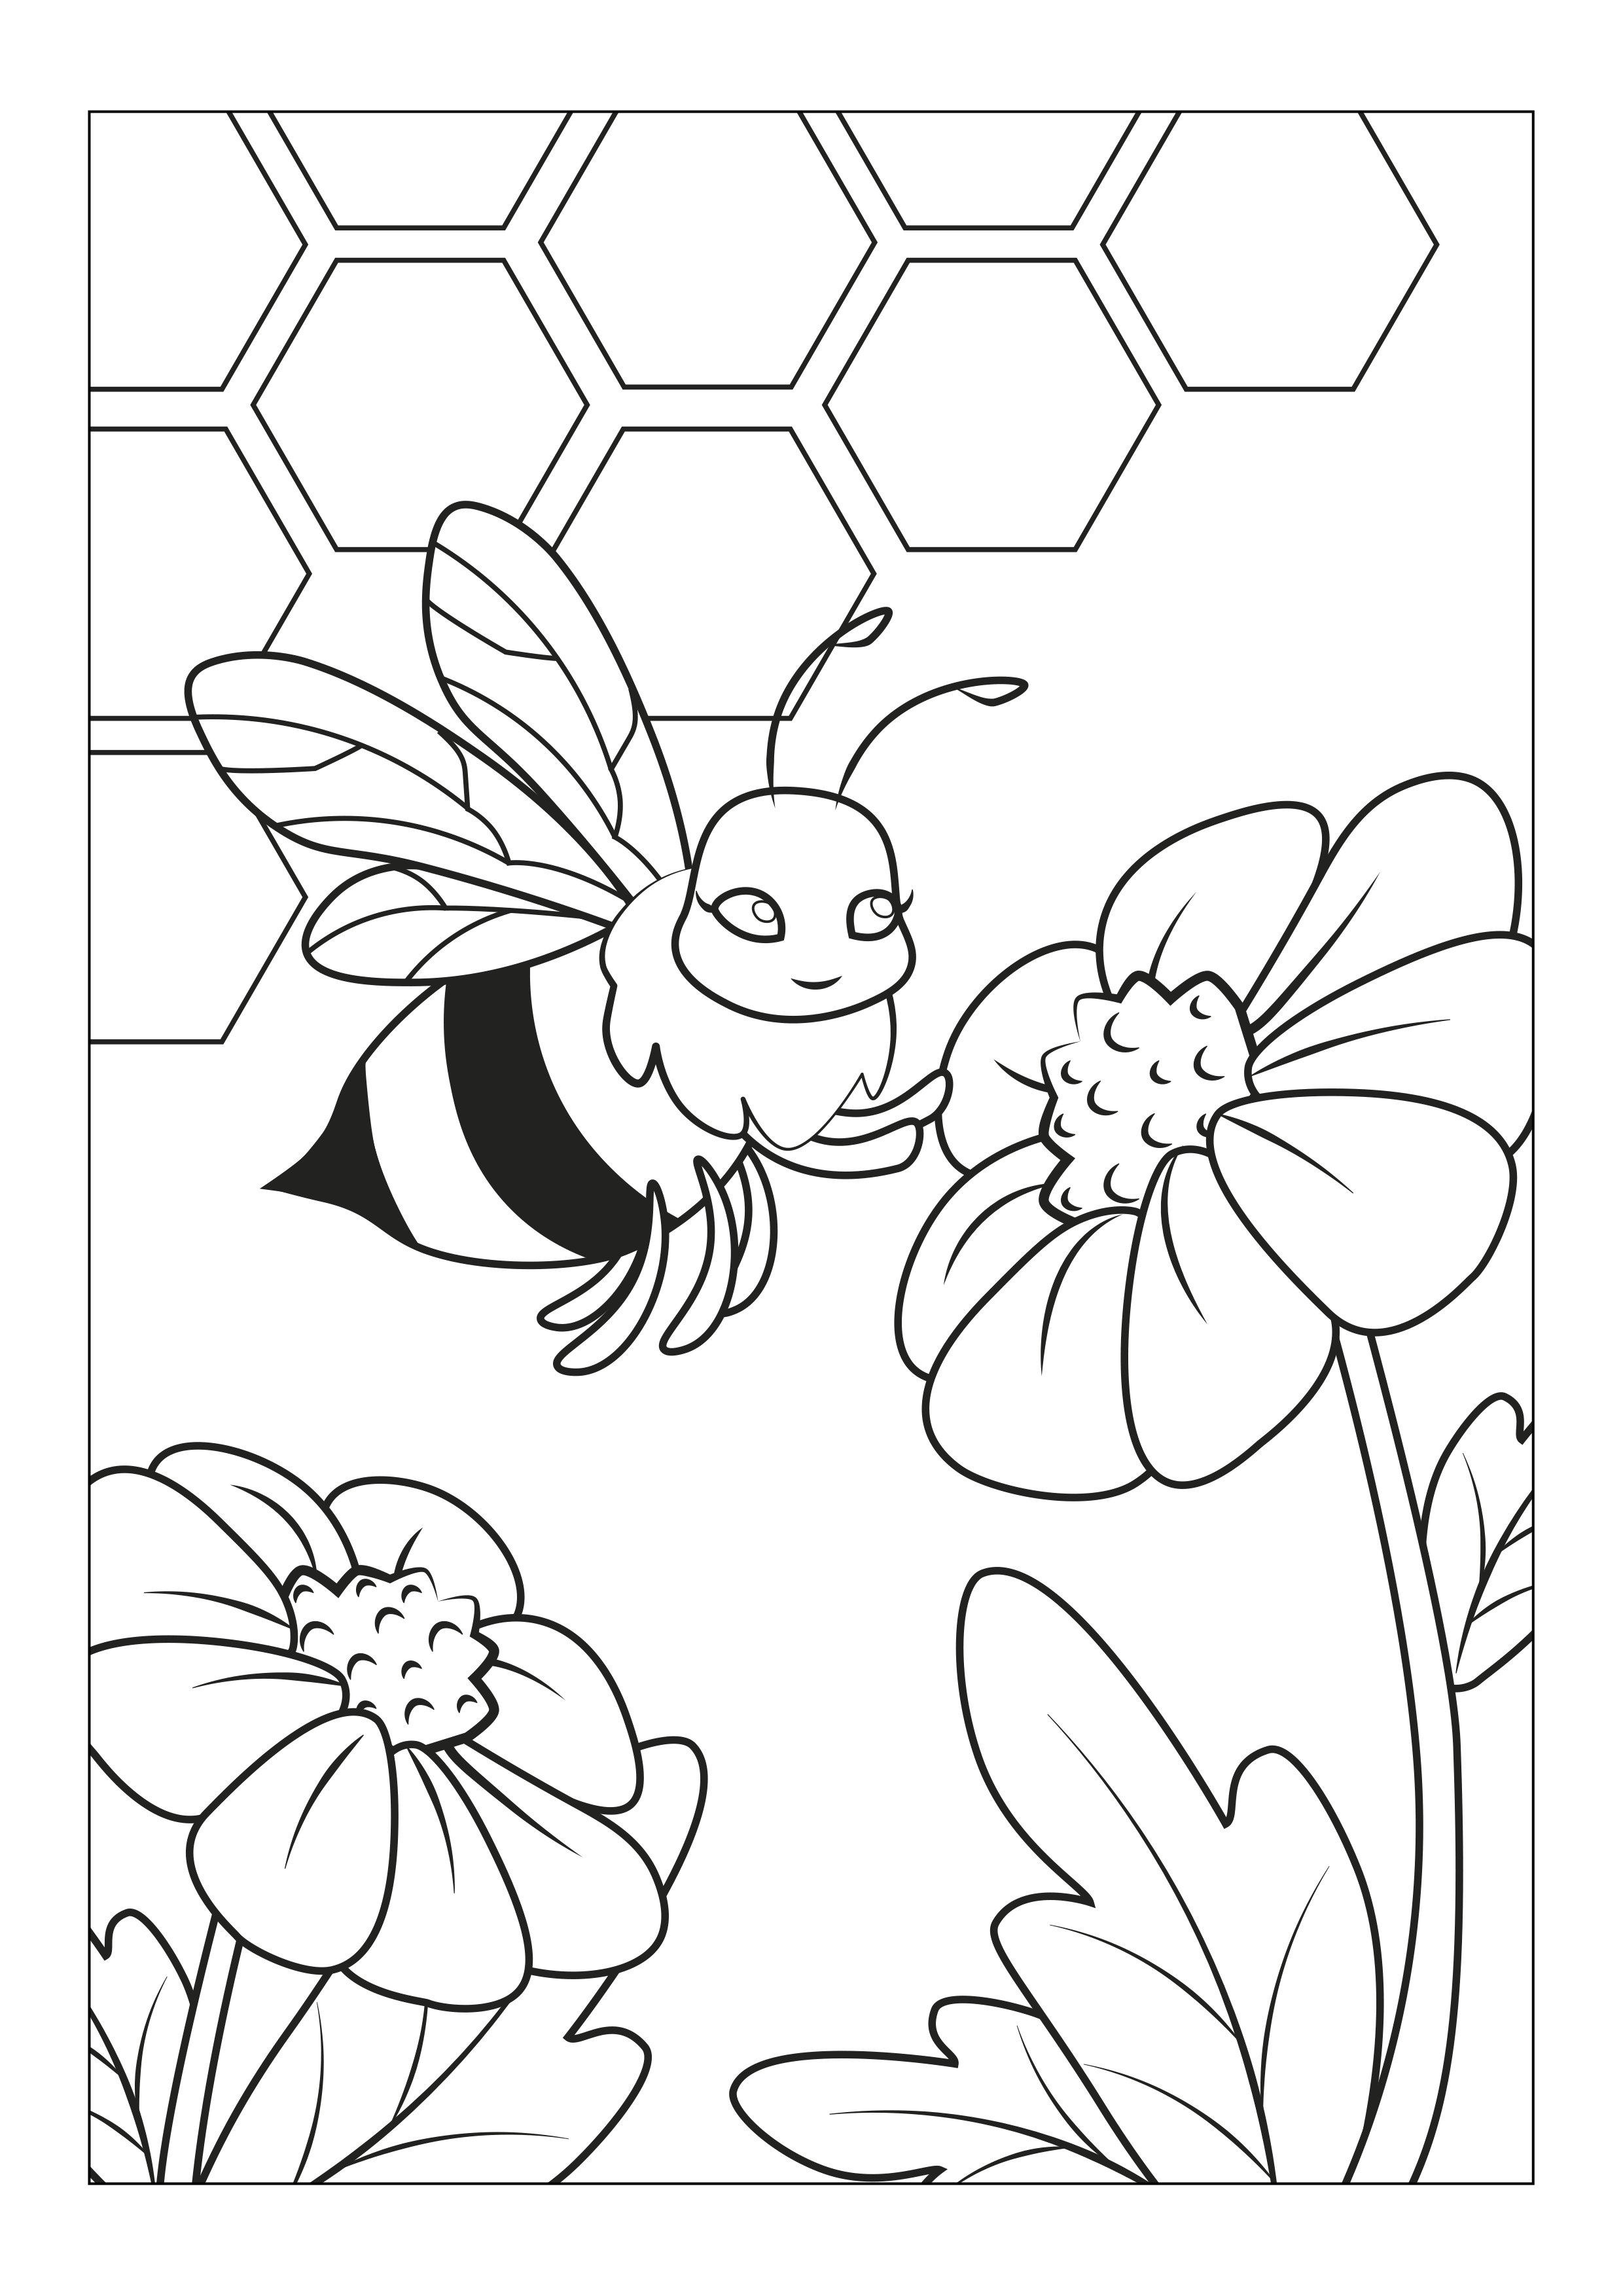 Coloring Pages Lego Owen Coloring Pages Cheap Coloring Pages